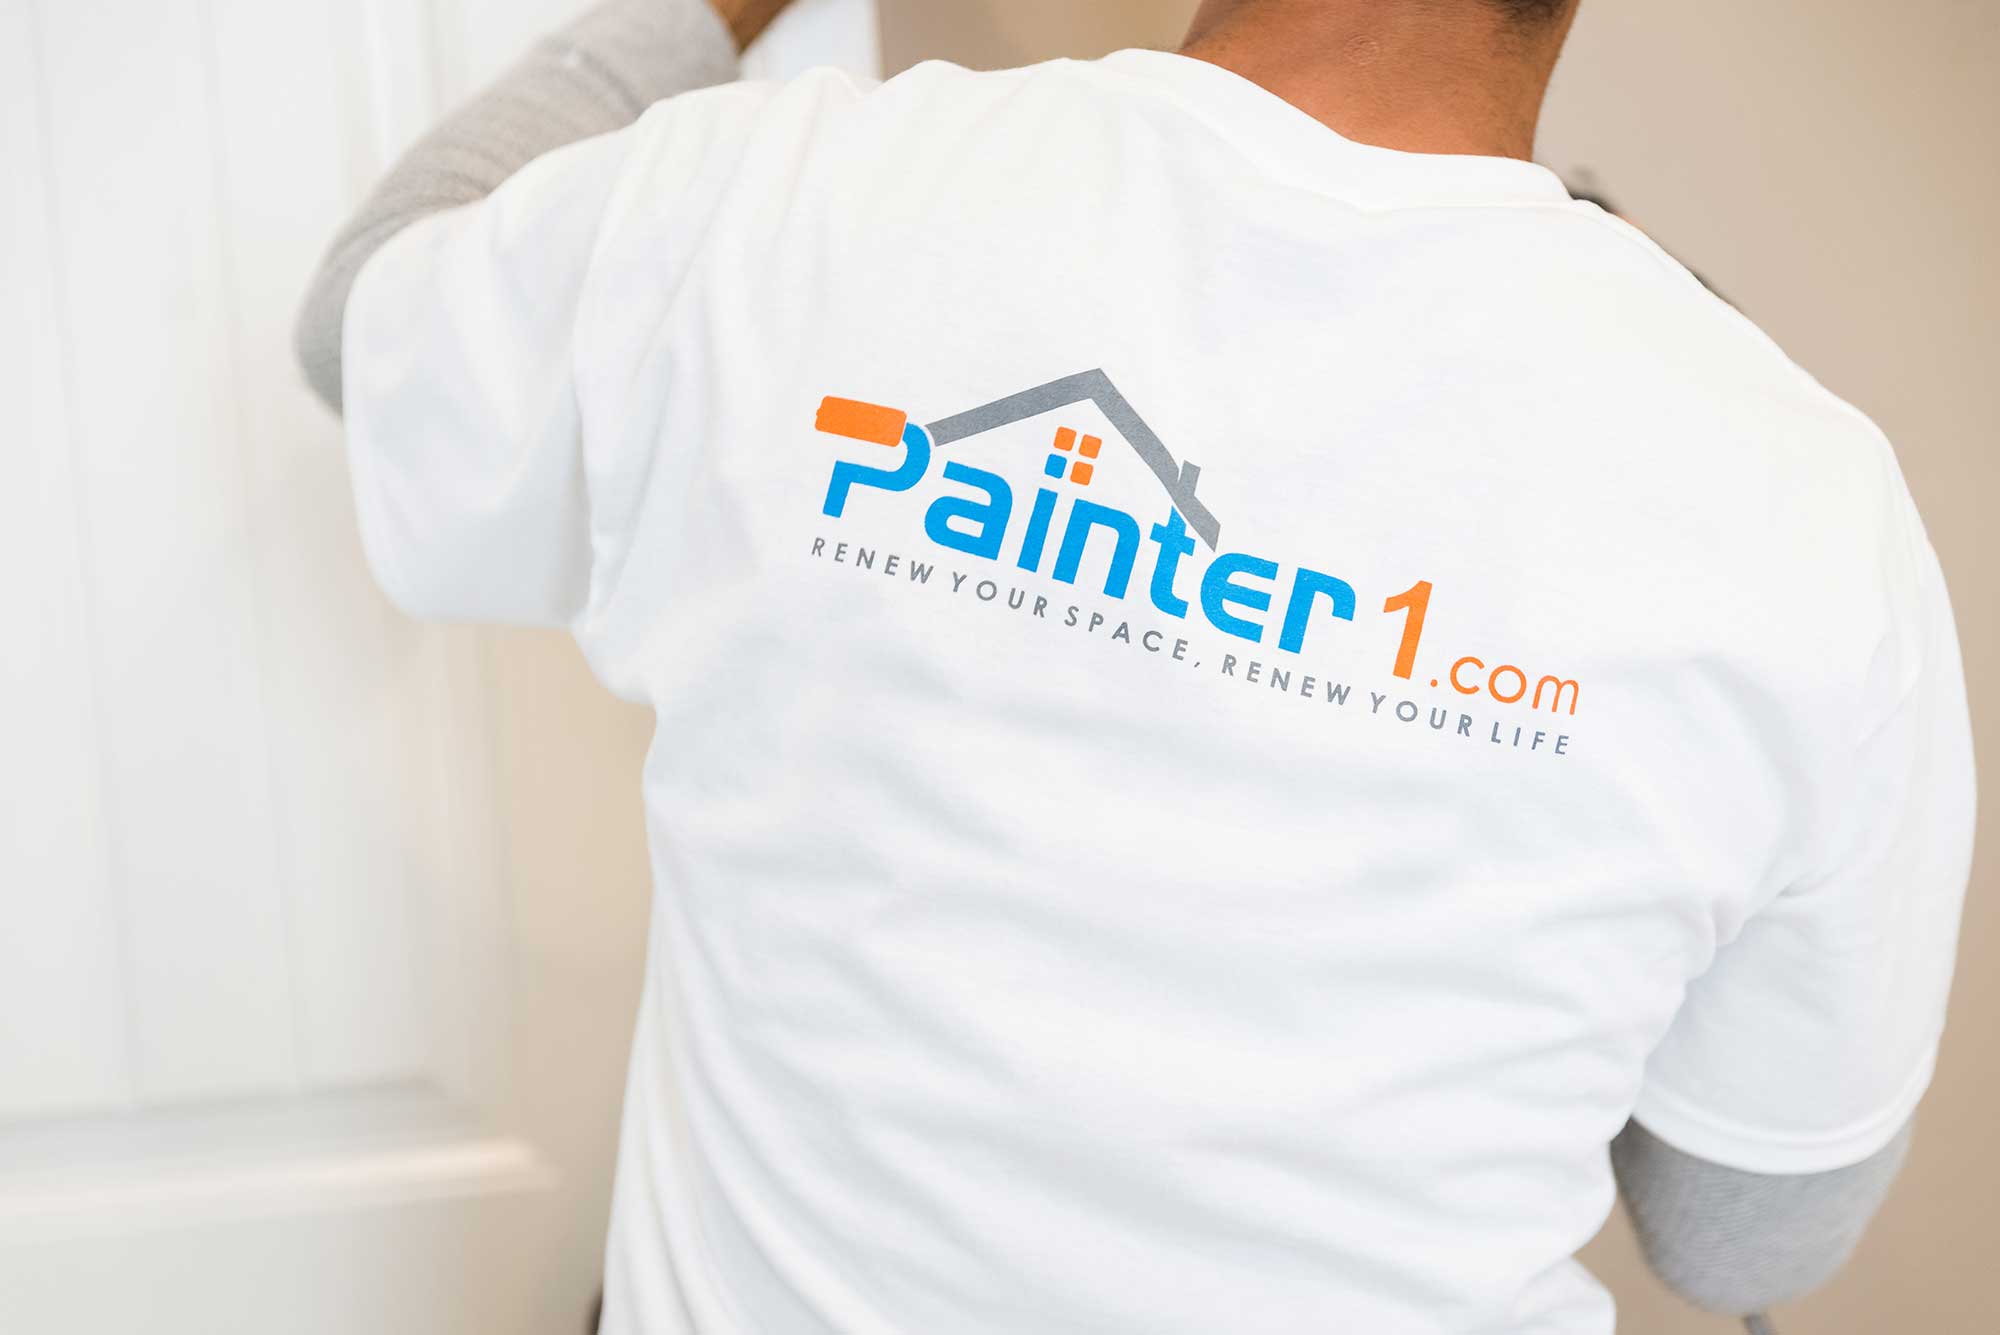 If you are searching for wallpaper removal in Salt Lake City, Painter1 offers professional wallpaper removal in Salt Lake City.